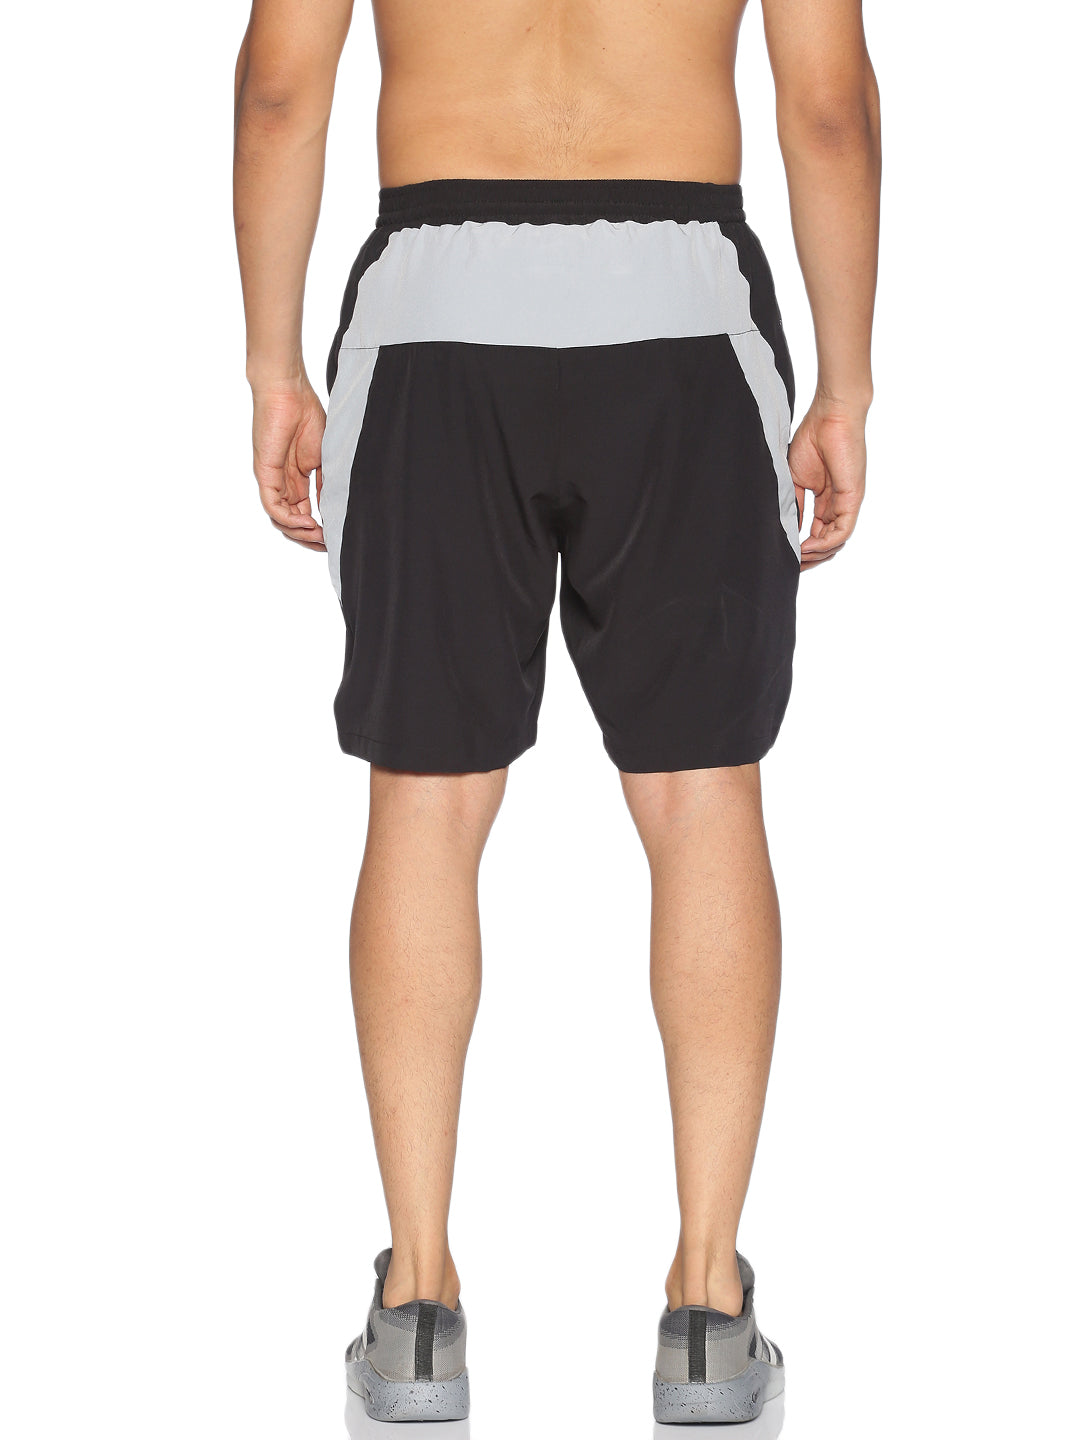 Wild Dogs Workout Dry-fit Black Shorts